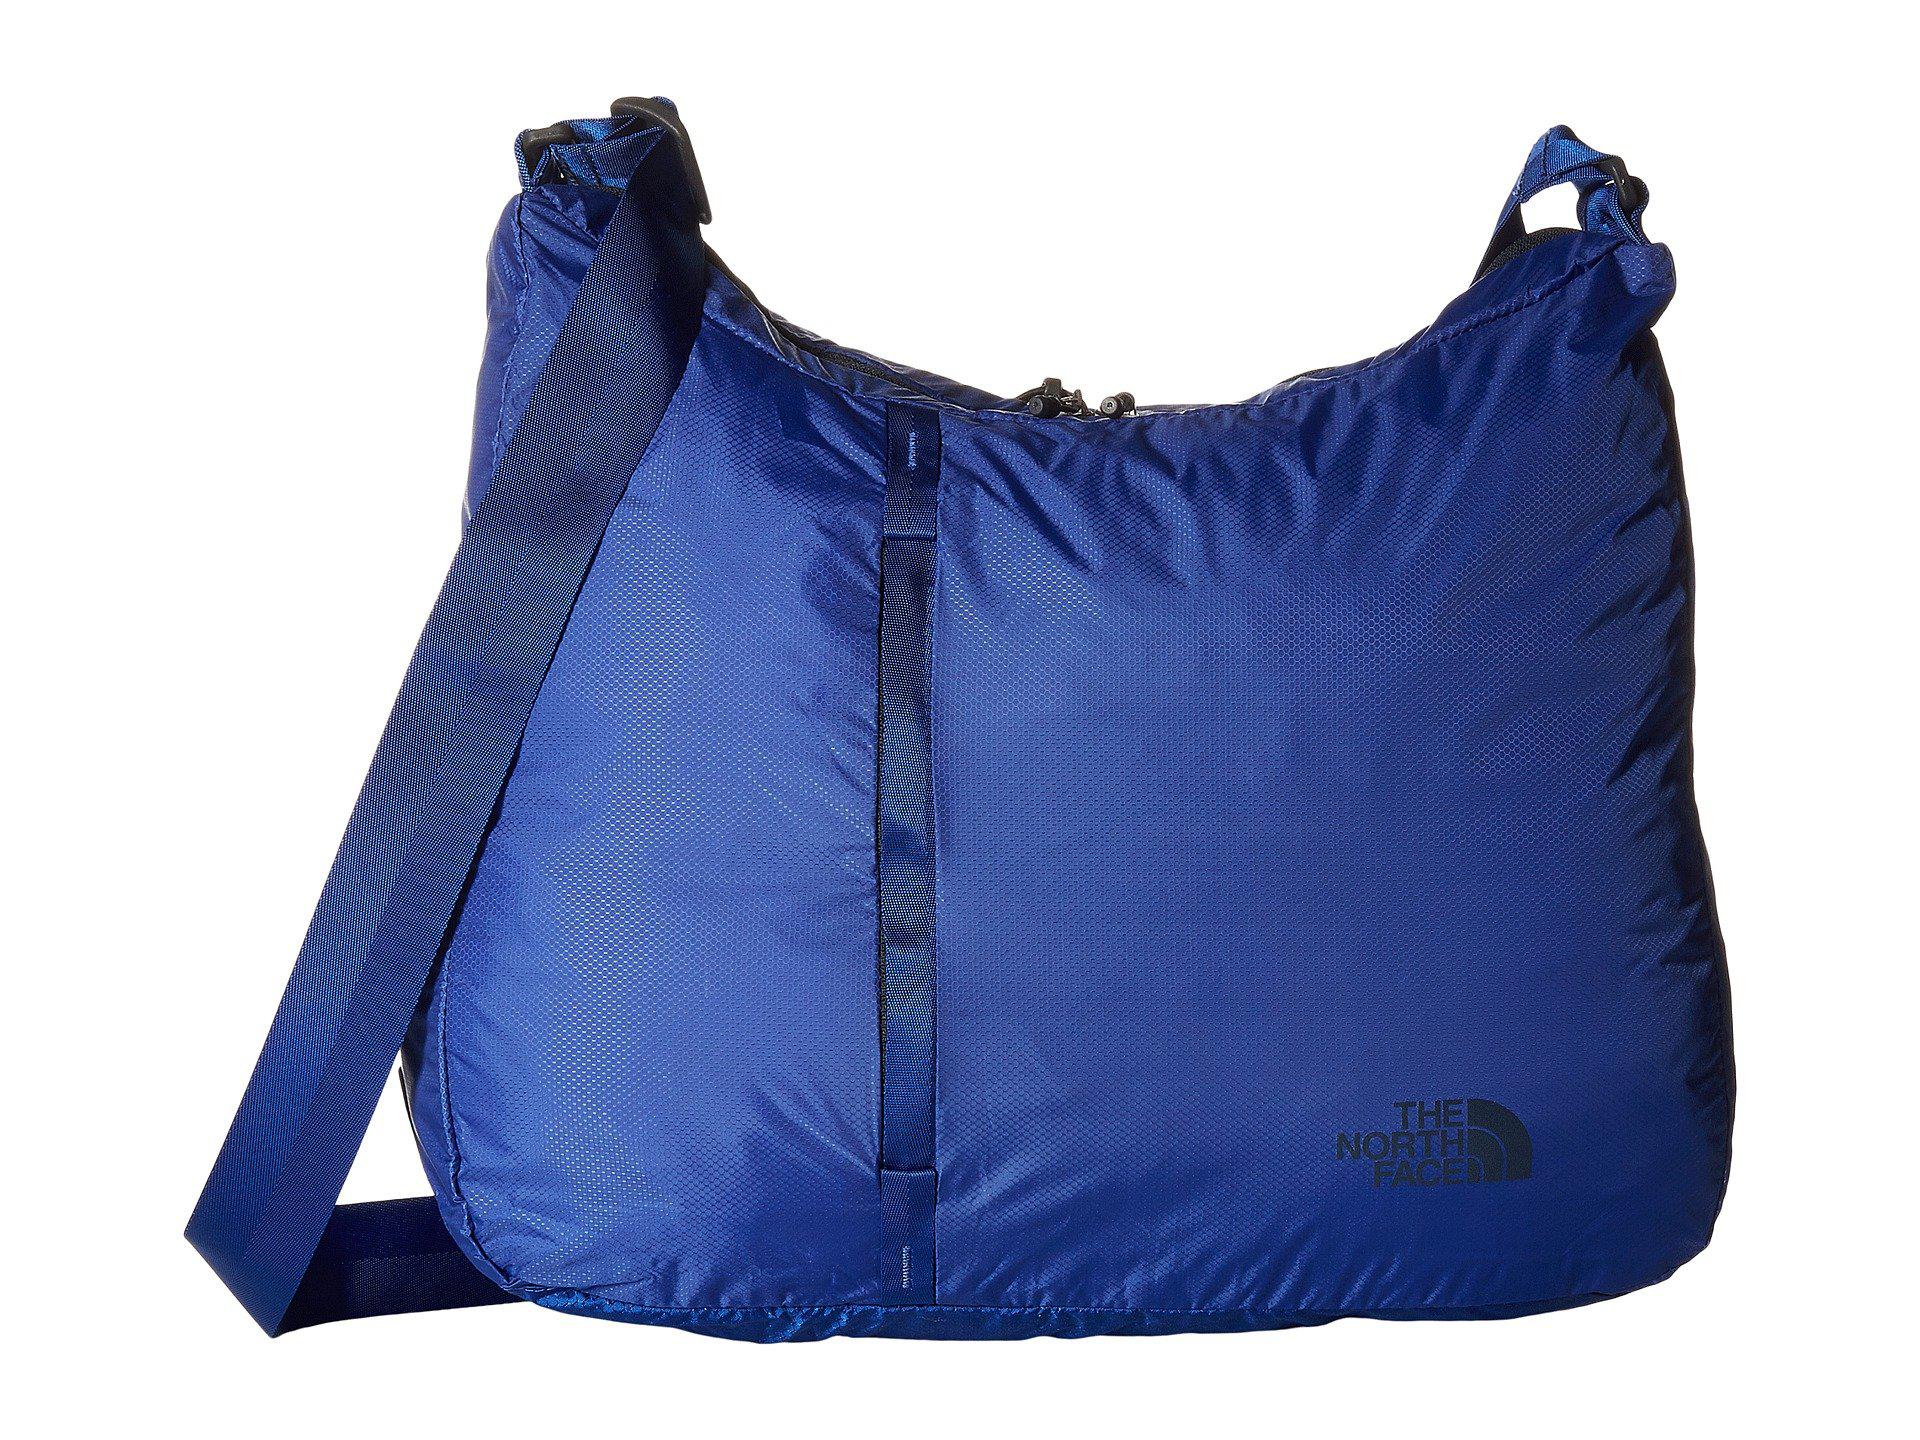 the north face flyweight tote bag